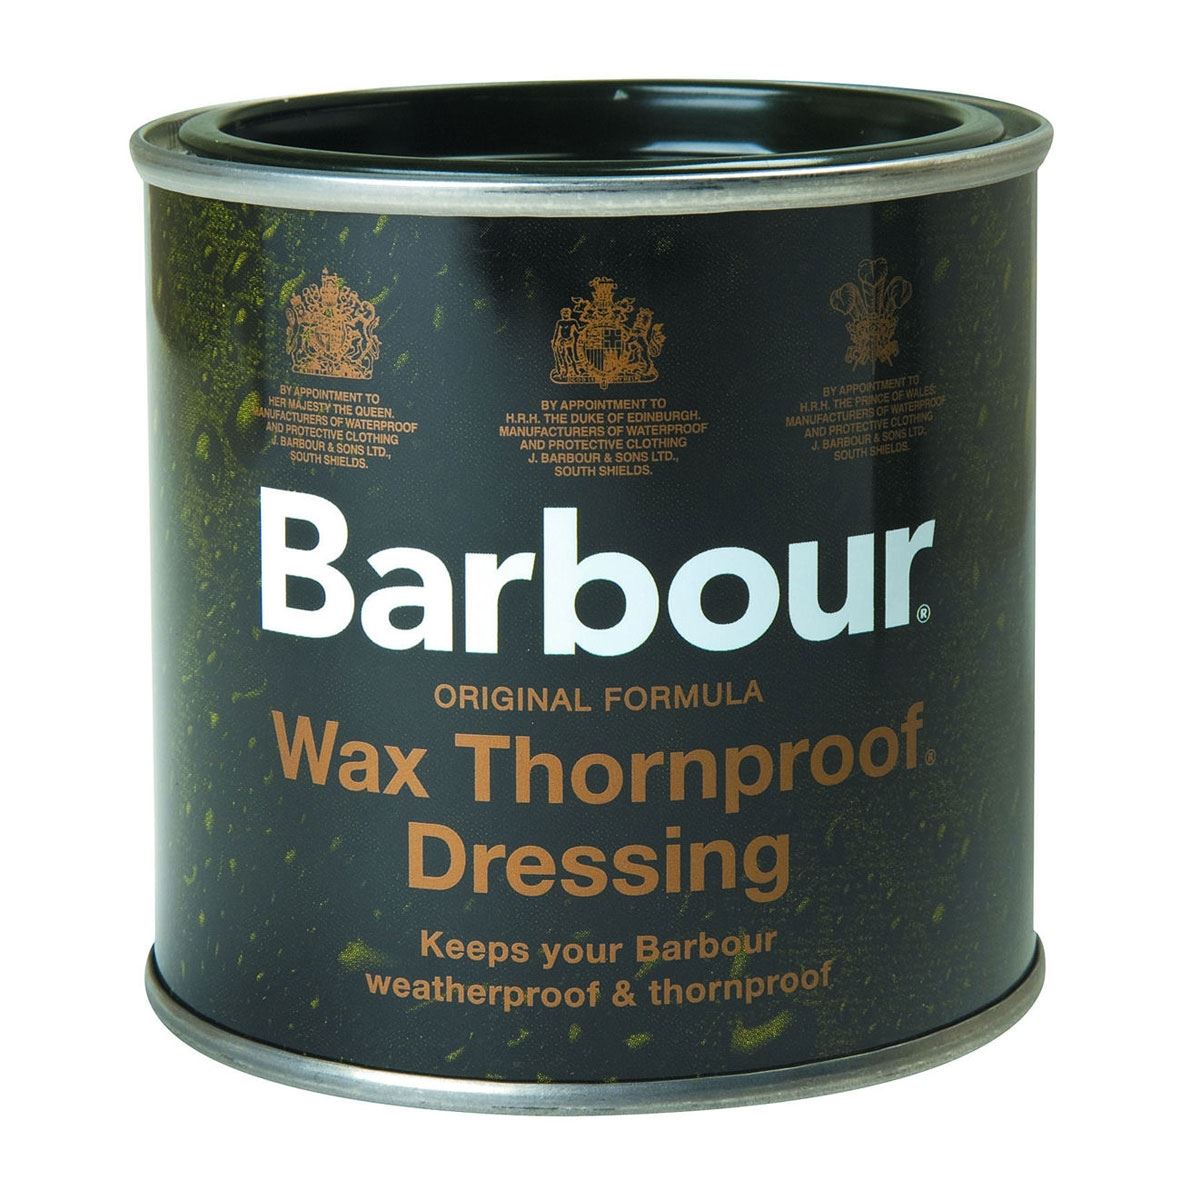 What are the specifics of Barbour Wax Thornproof Dressing?